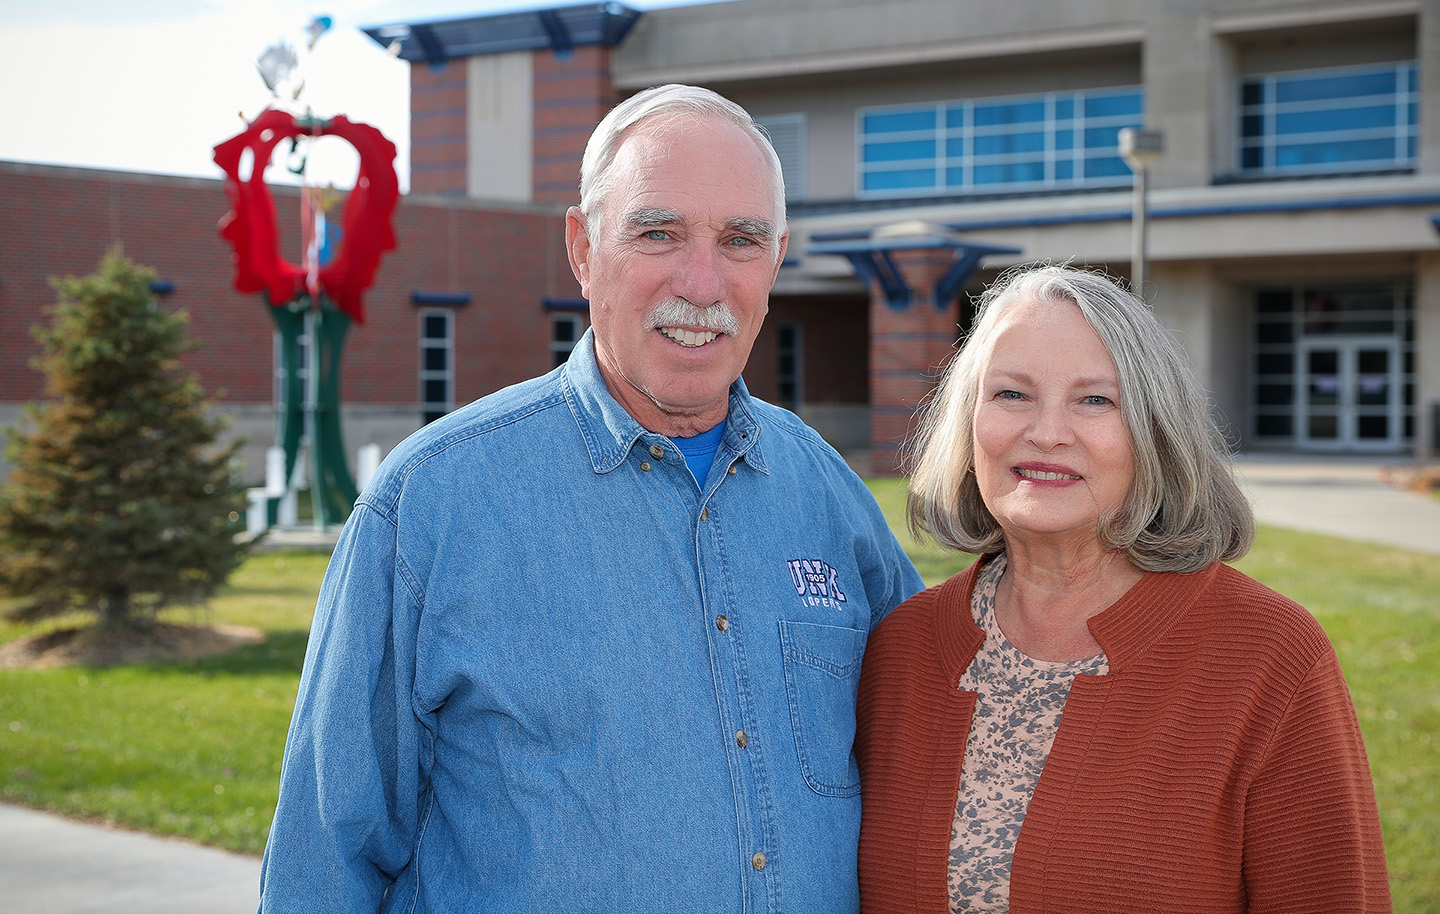 Steve and Kathy Godeken both graduated from Kearney State College in 1973 with teaching degrees. Proceeds from their “retirement auction” will benefit students at their alma mater. (Photo by Erika Pritchard, UNK Communications)